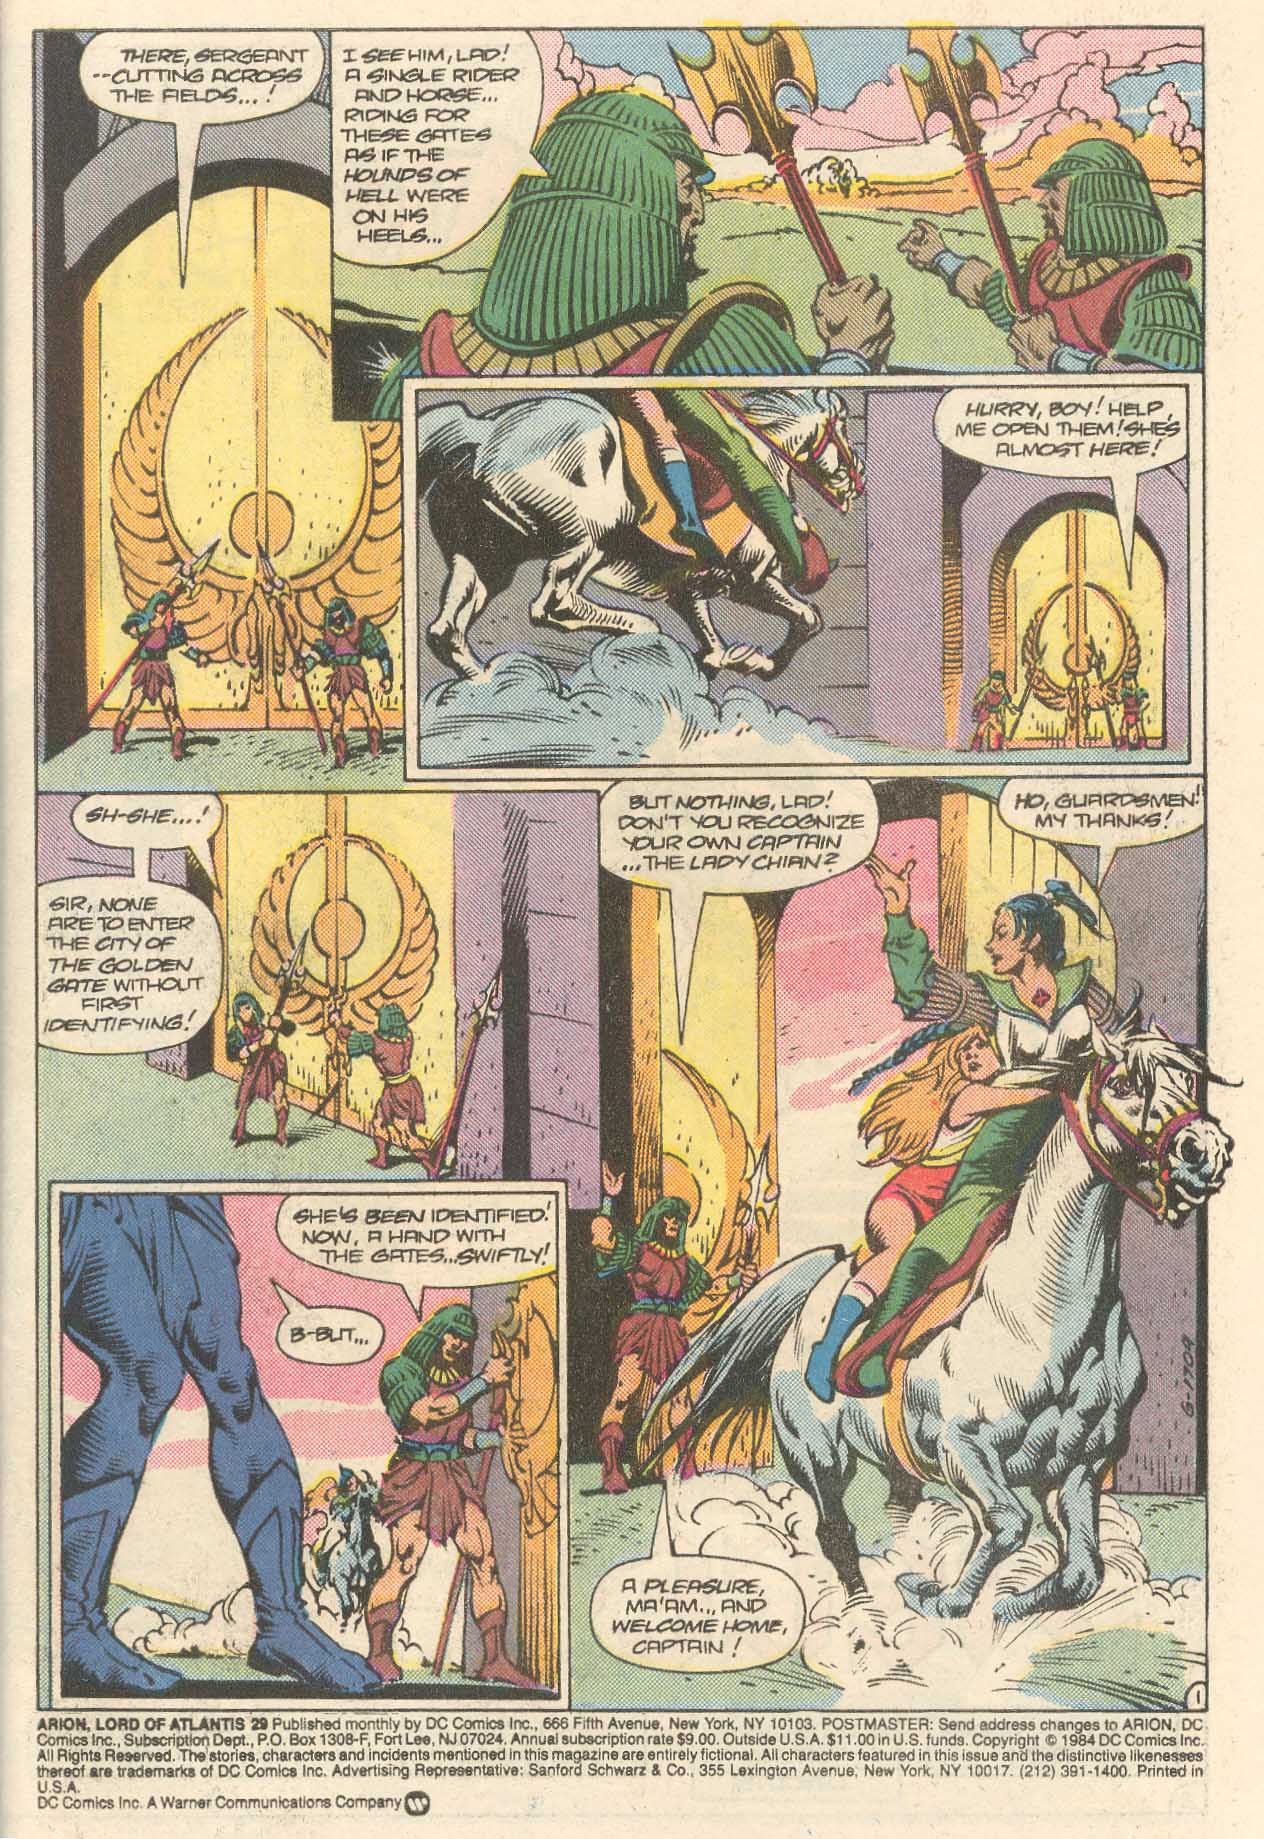 Arion, Lord of Atlantis Issue #29 #30 - English 2